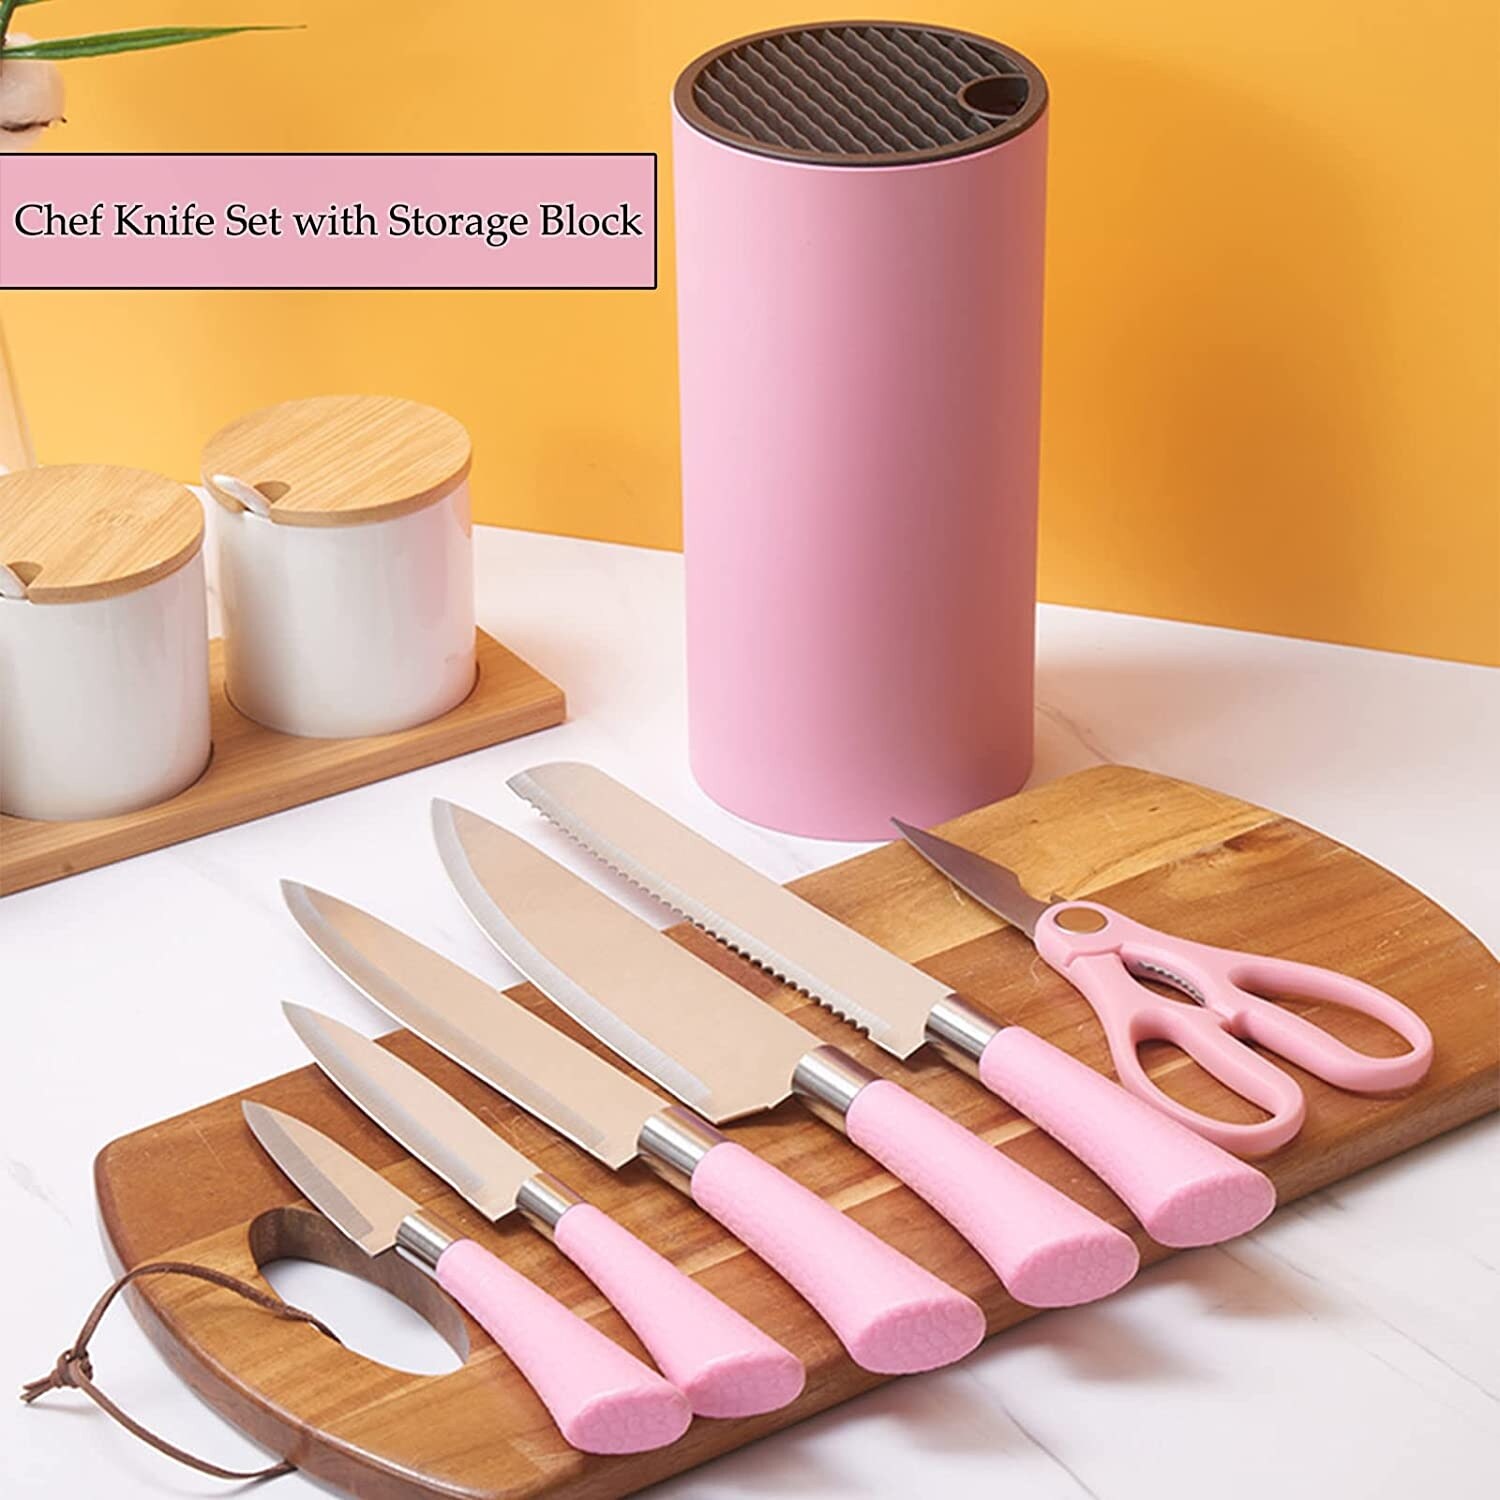 https://ak1.ostkcdn.com/images/products/is/images/direct/5c8f835fcbeb509ee7410abcd27cc3799bbefe32/Kitchen-Knife-Set%2C7-Pieces-Pink-Non-stick-Chef-Knife-Set-with-Storage-Block-%28Pink%29.jpg